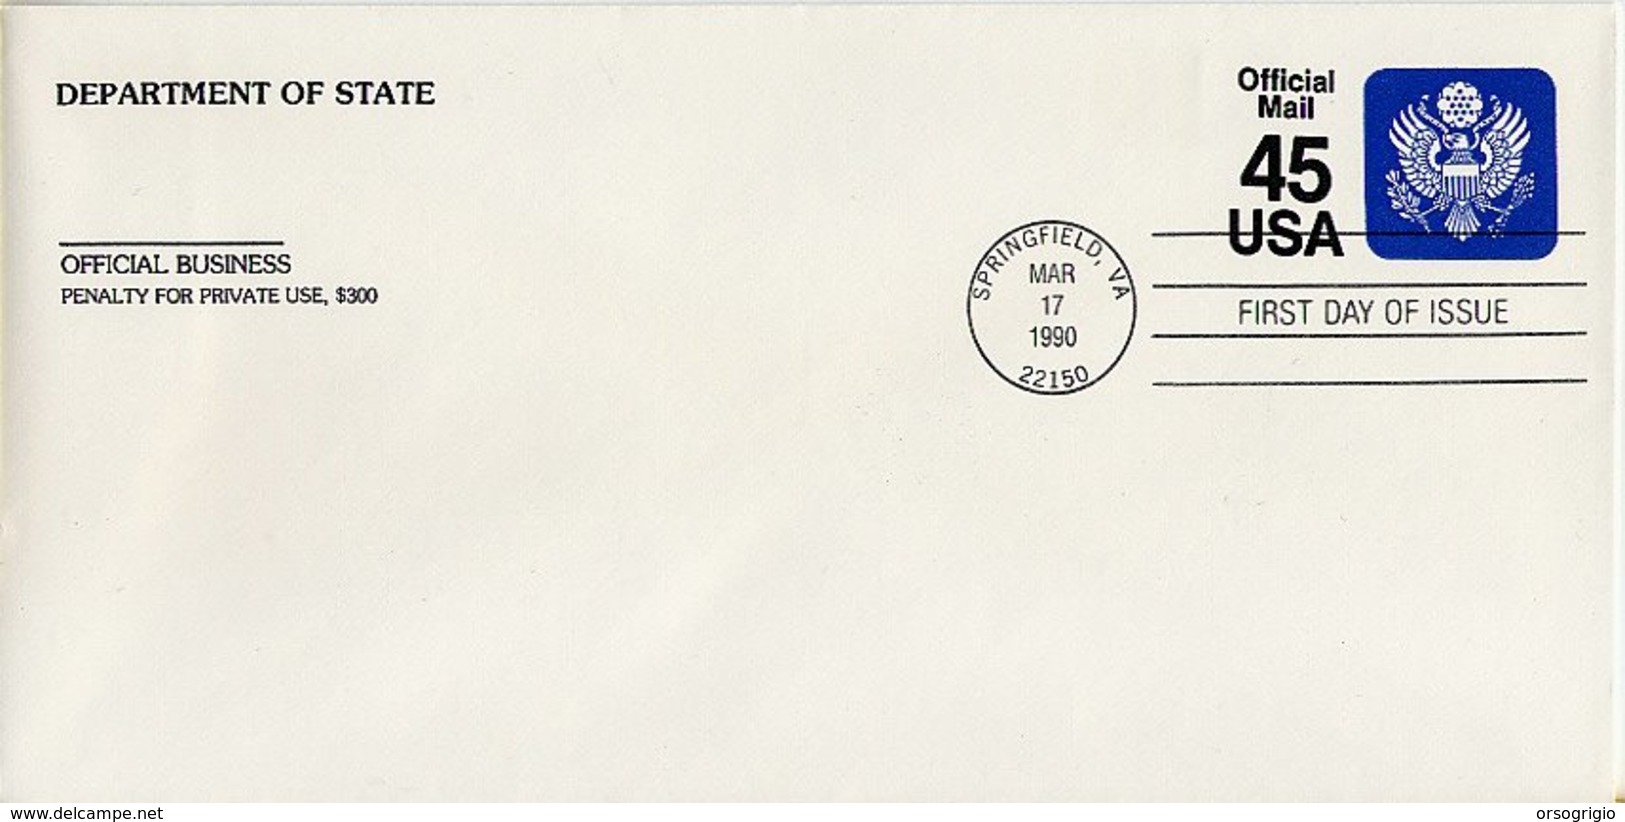 USA -  FDC - BUSTA INTERO POSTALE - 1990 - OFFICIAL MAIL 45 - 1981-00